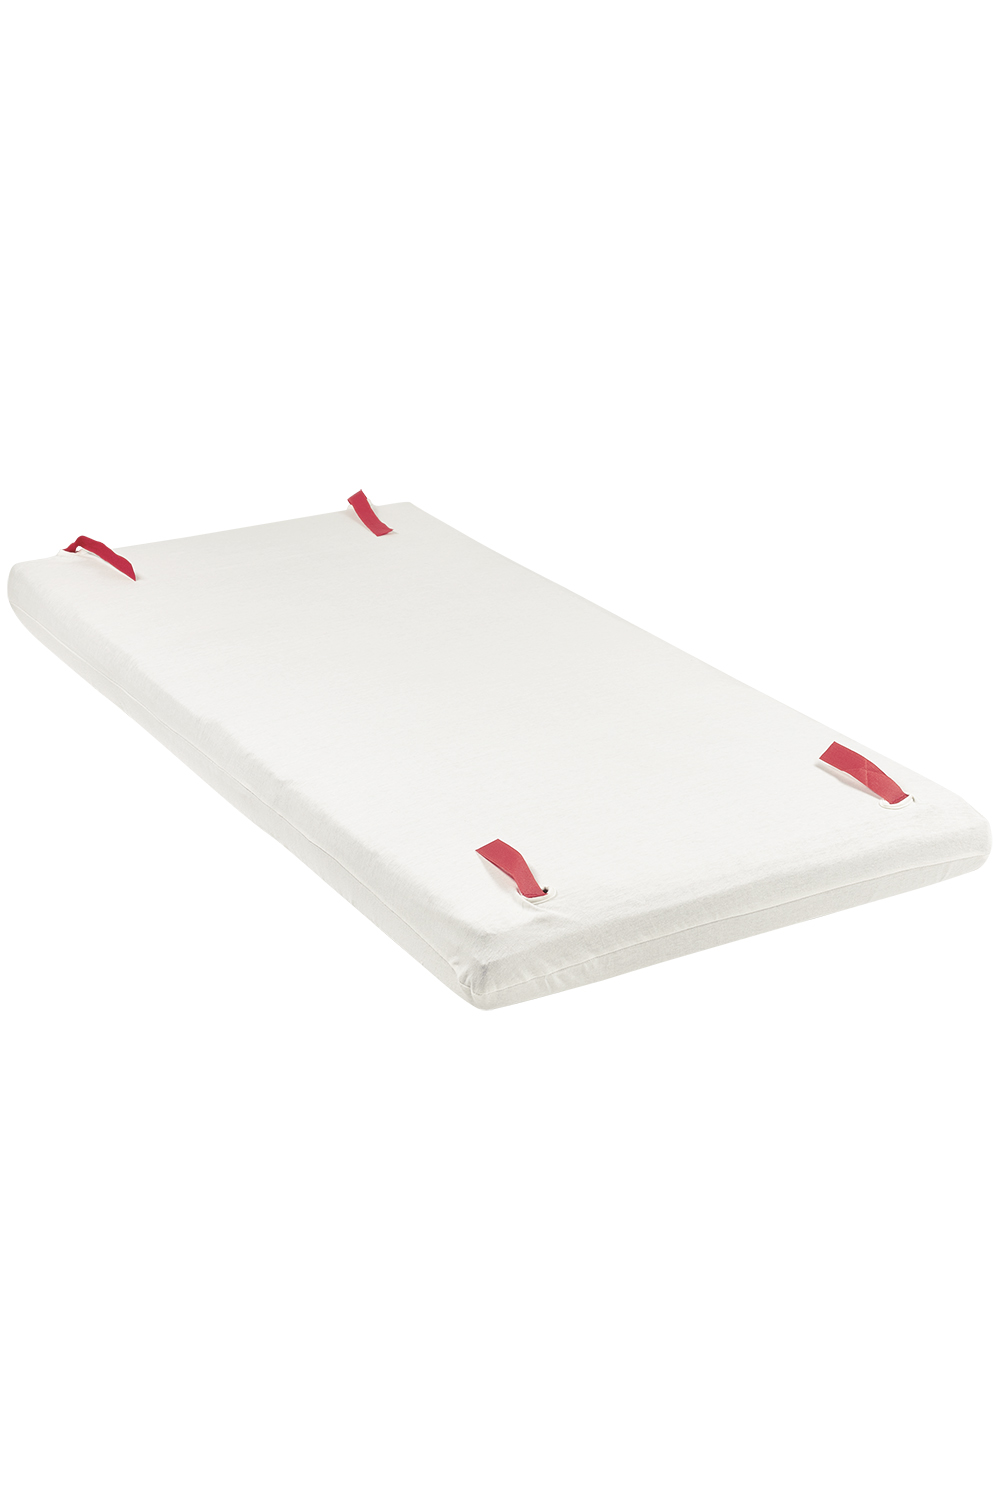 Camping bed mattress cover deluxe Uni - offwhite - 60x120cm